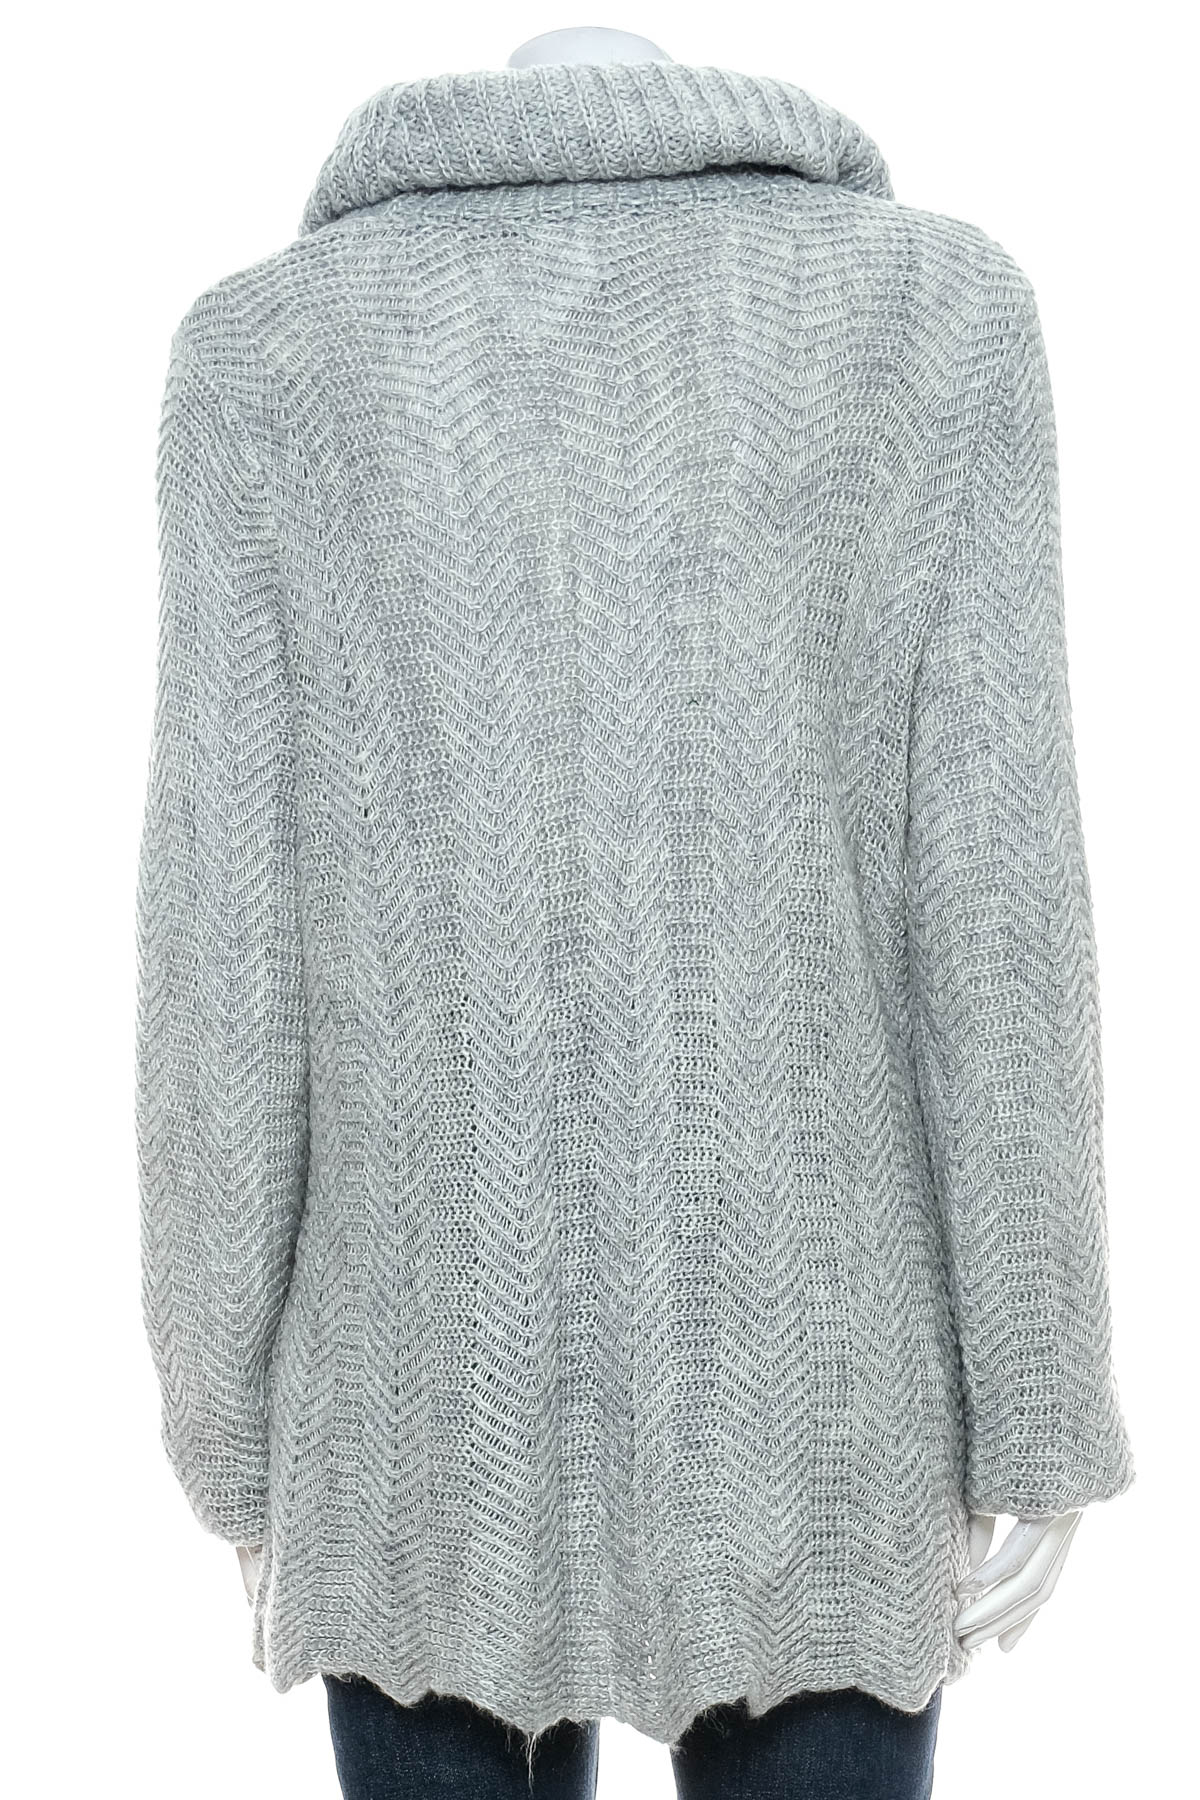 Women's sweater - SELECTION by S.Oliver - 1